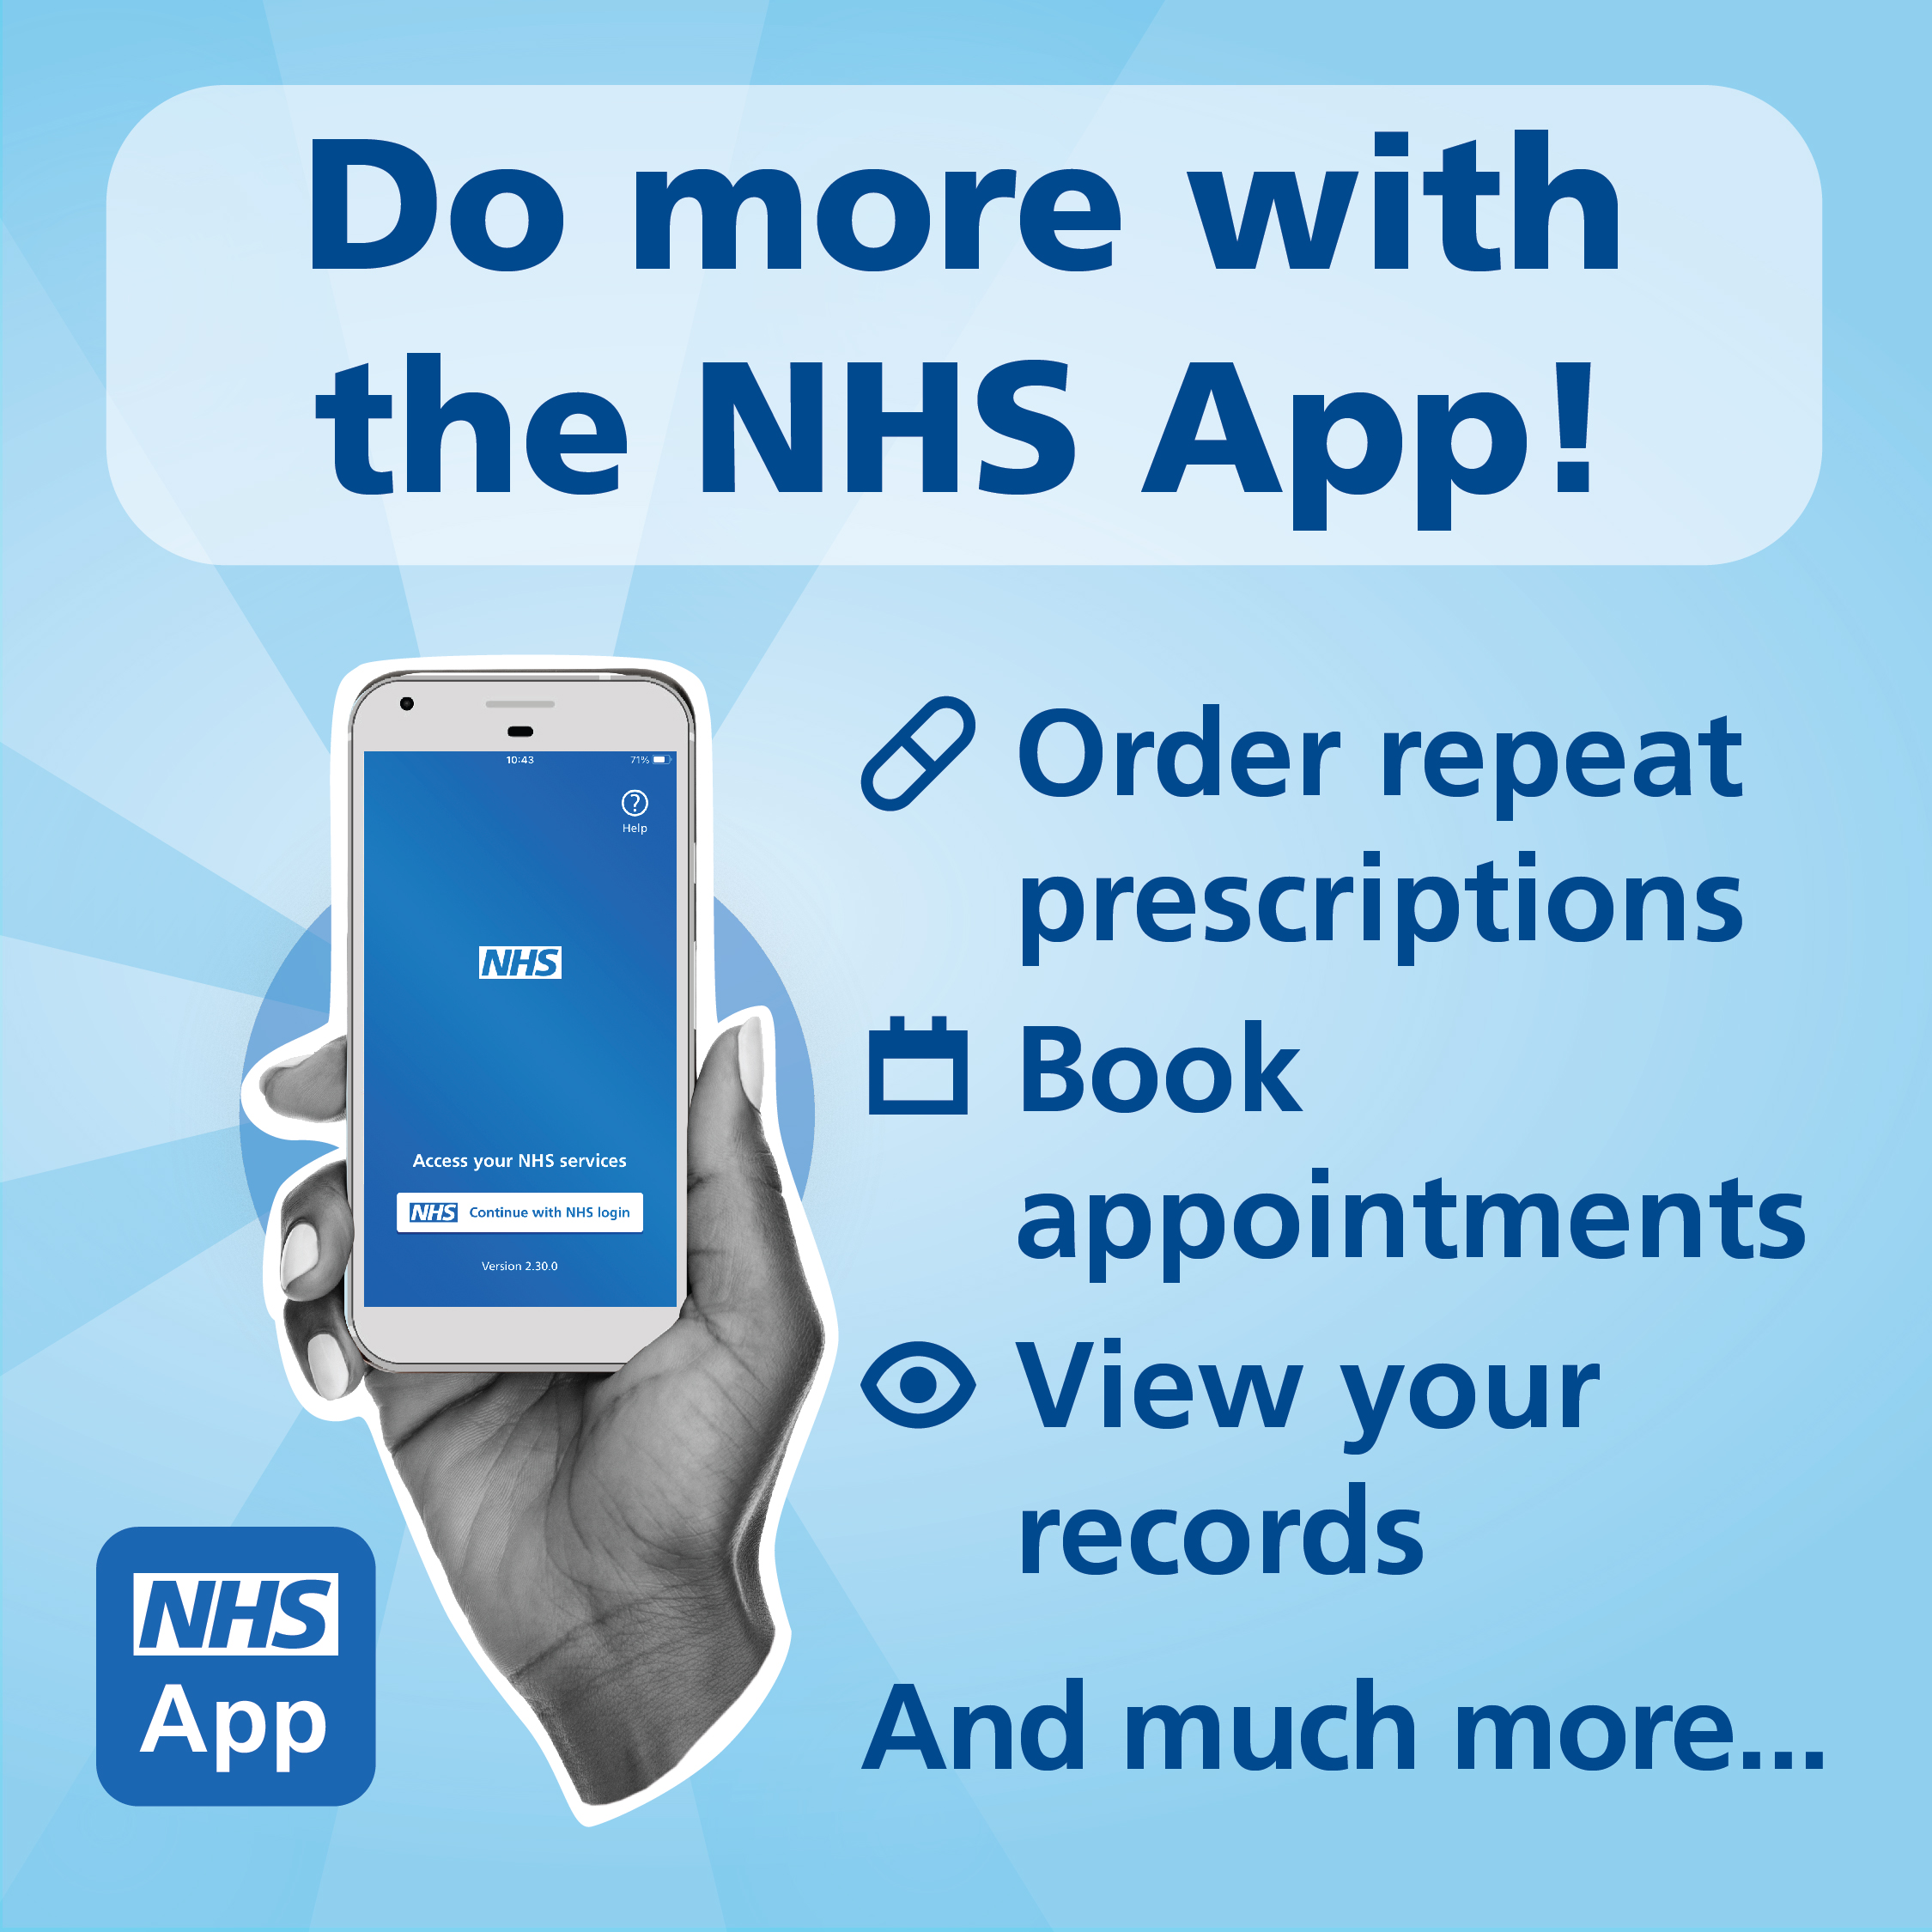 do more with the nhs app banner linked to the NHS app website